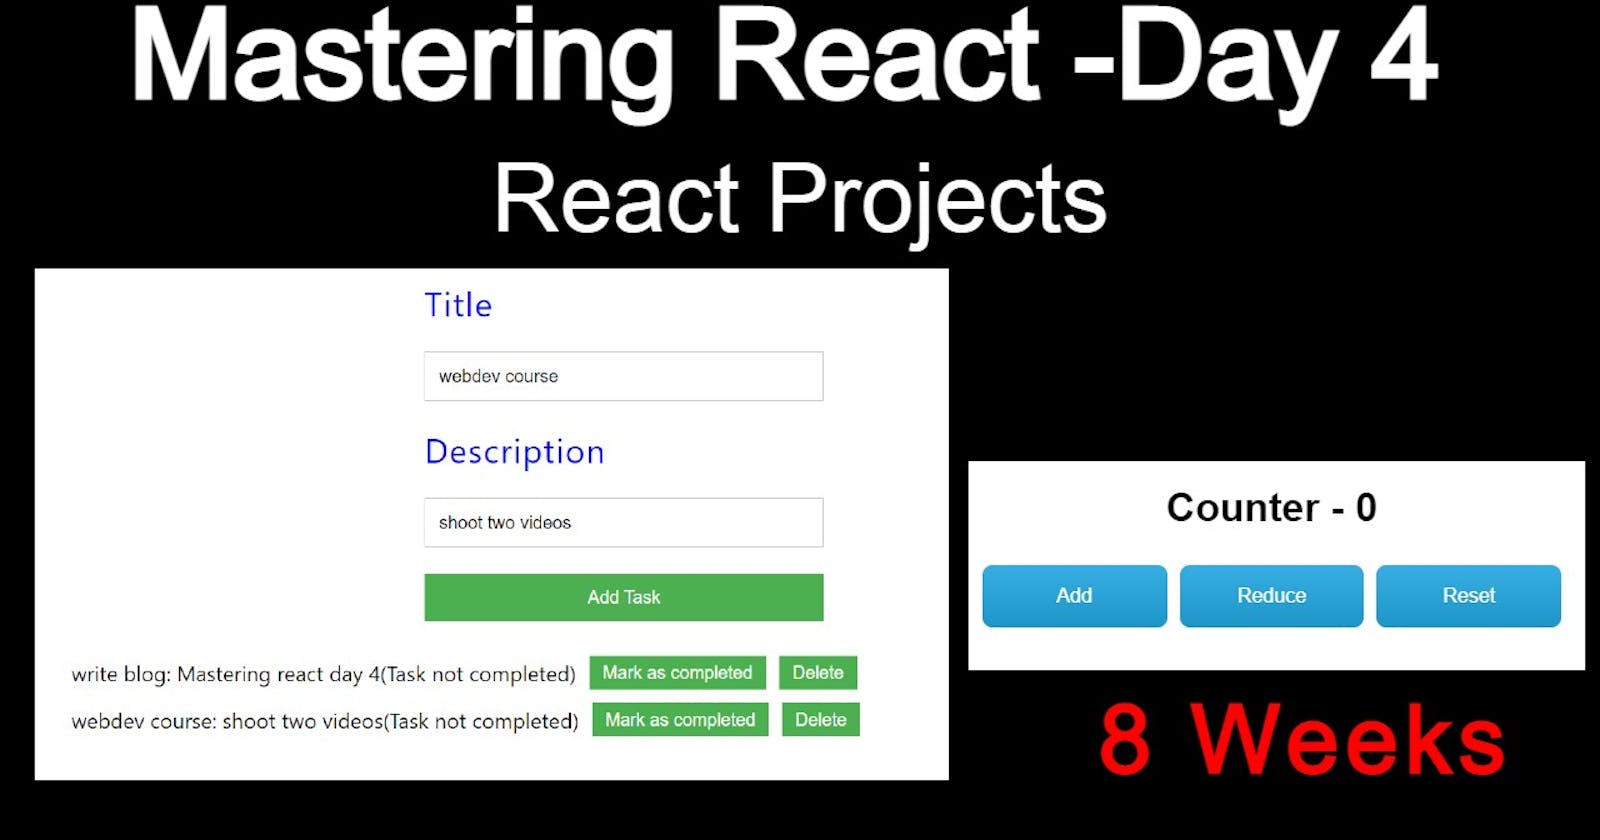 Mastering React in 8 weeks - Day 4